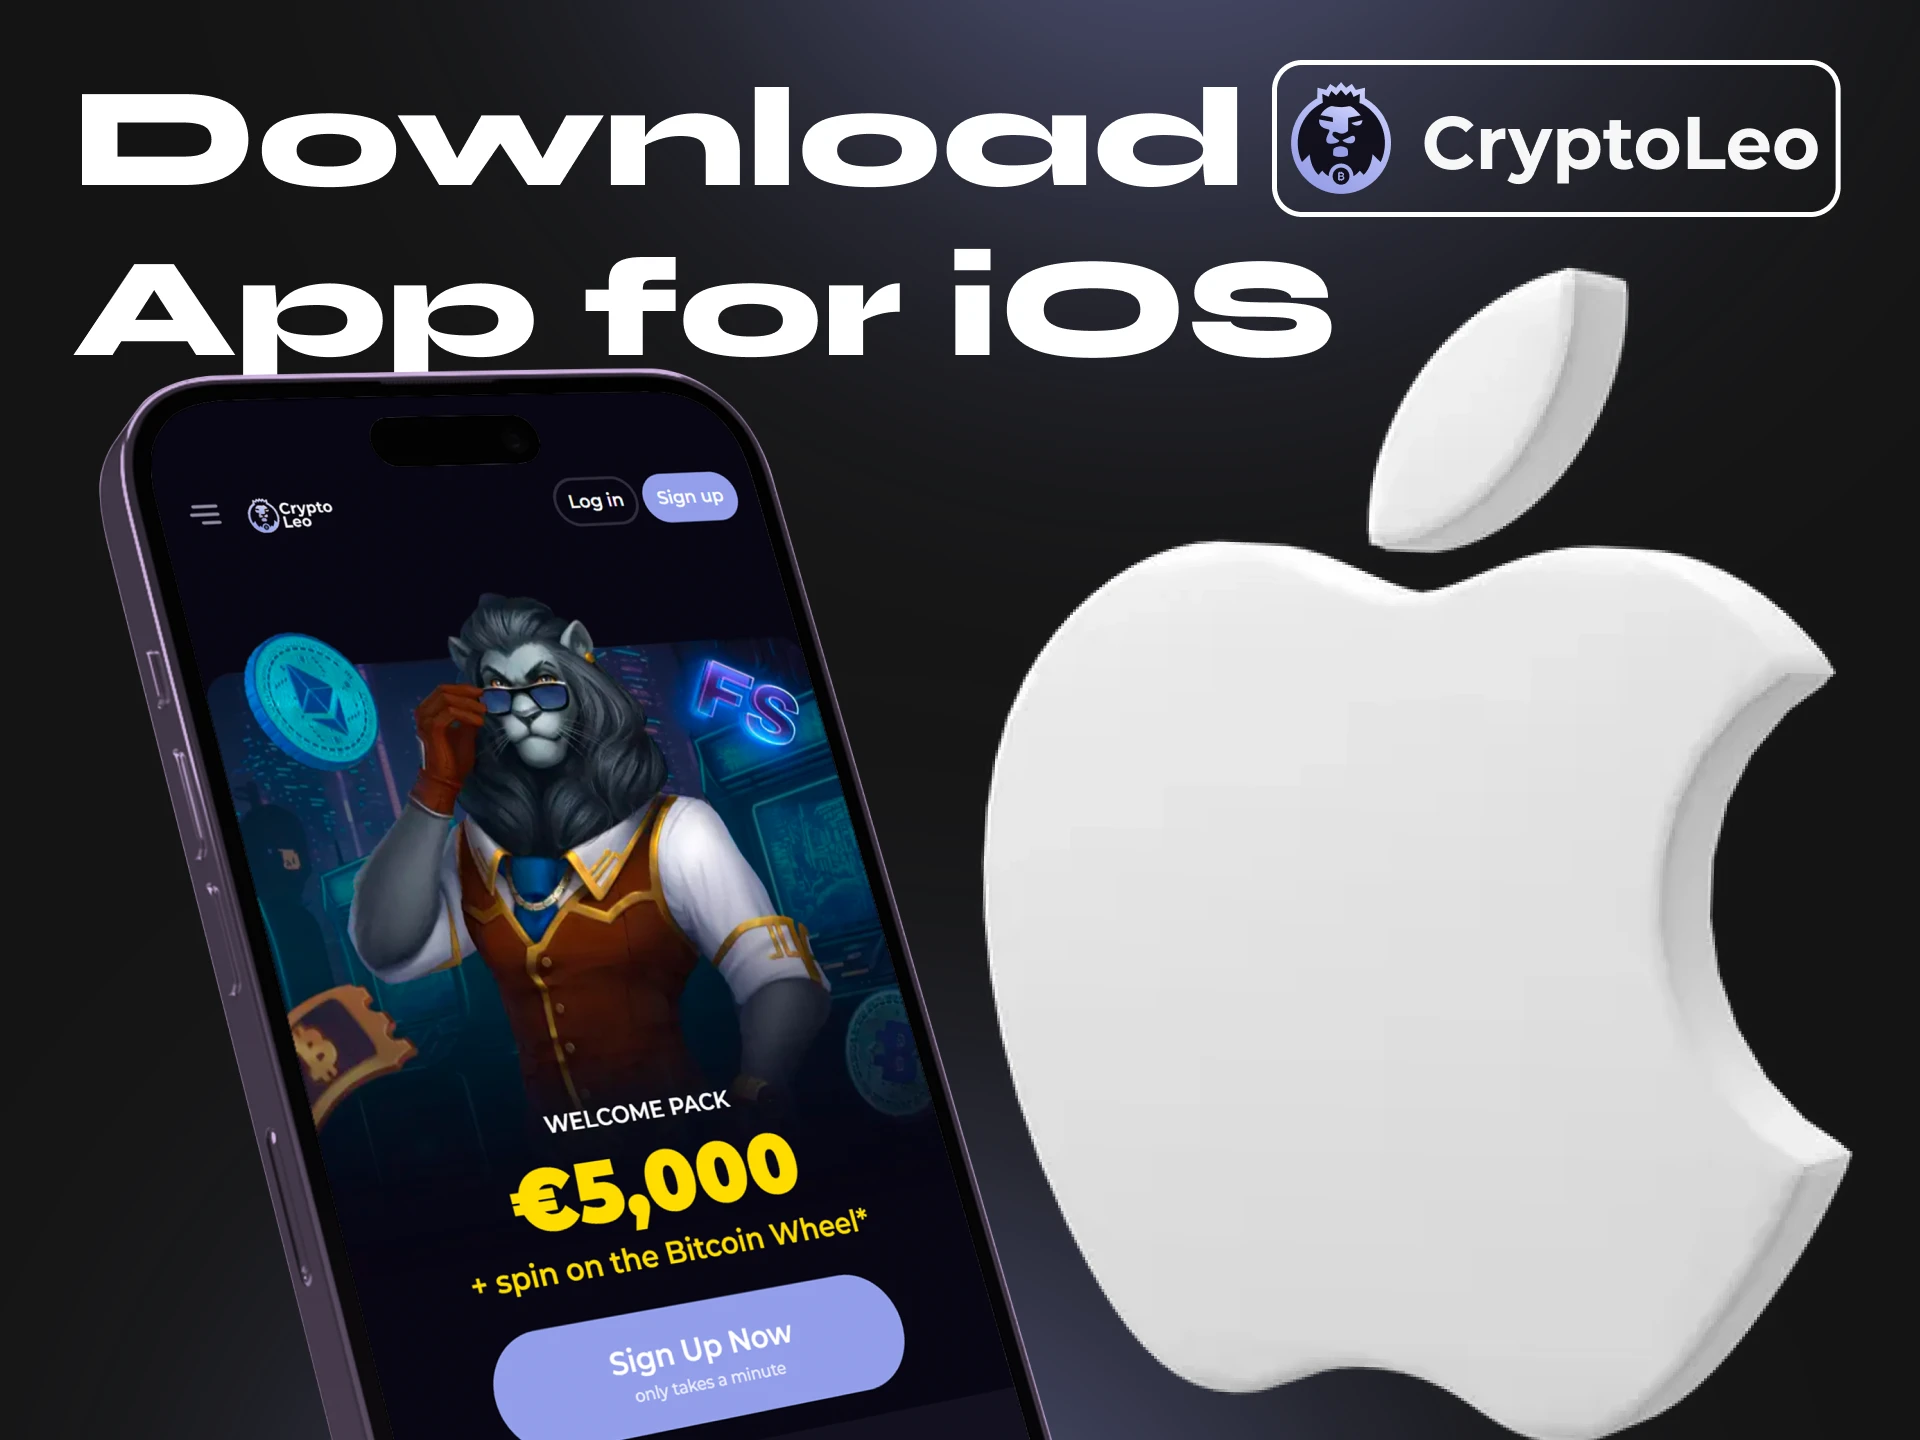 Follow these instructions to download the Cryptoleo app for iOS.